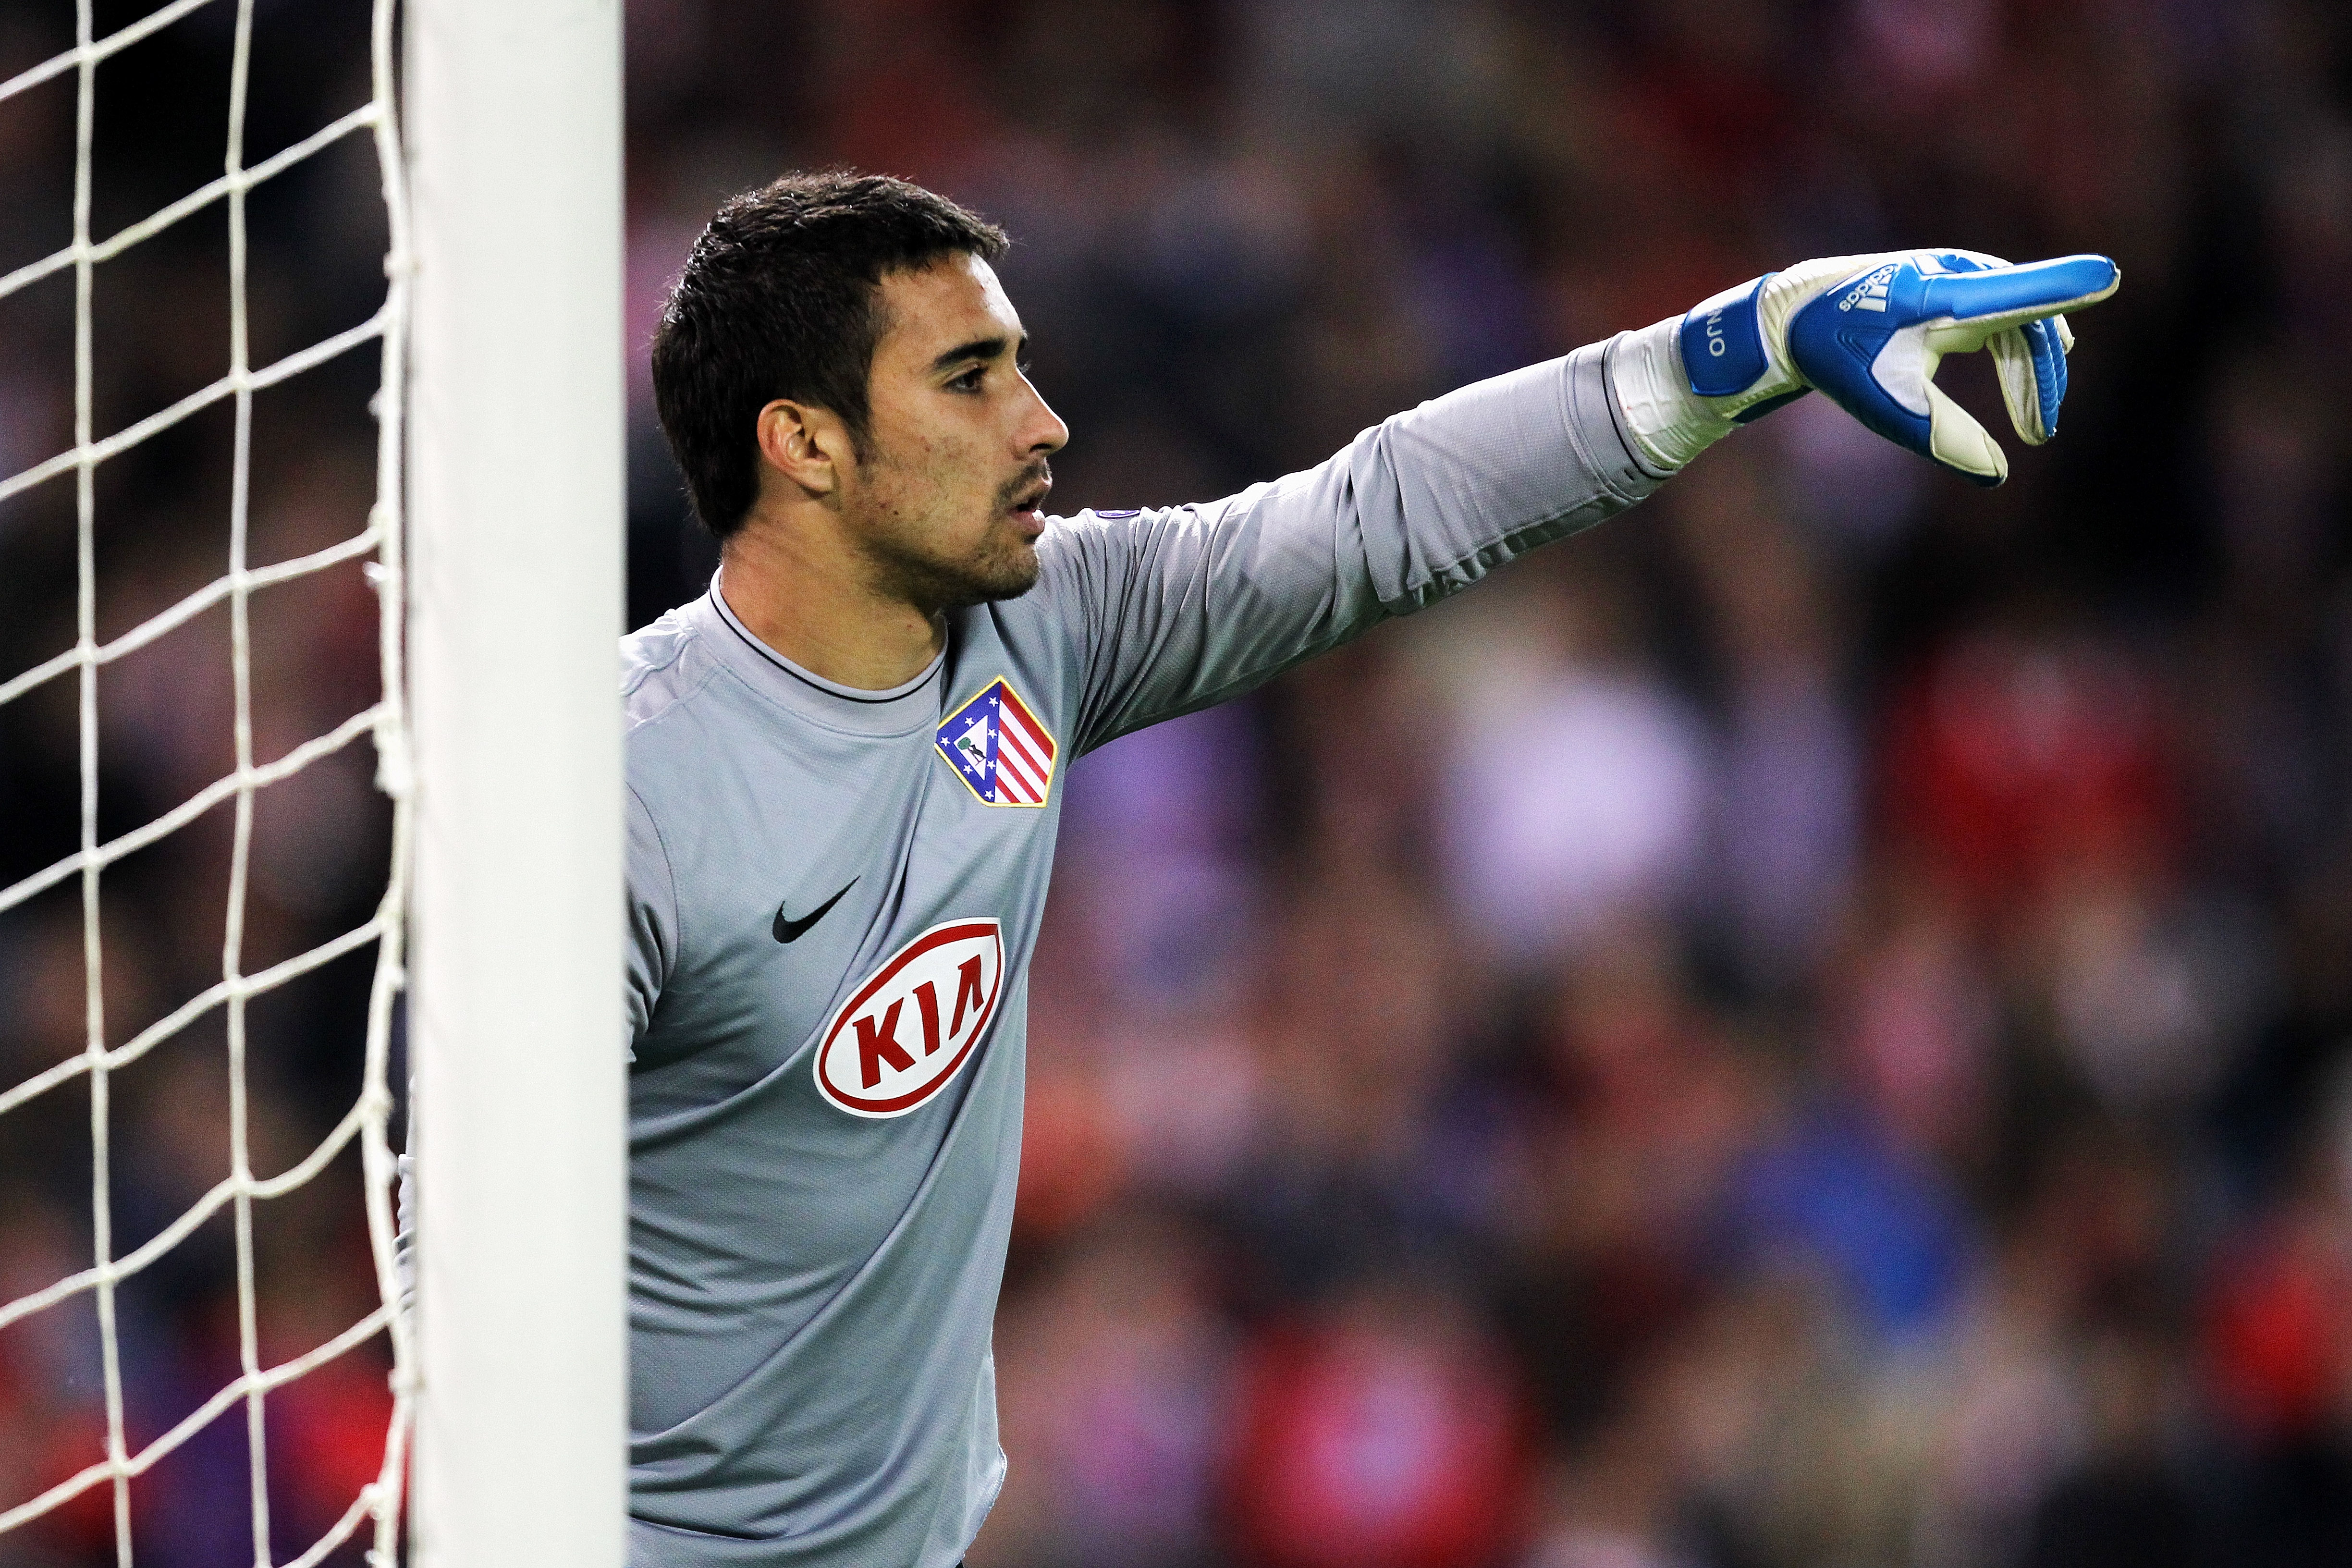 MADRID, SPAIN - NOVEMBER 03:  Sergio Asenjo of Atletico Madrid speaks to his defence during Champions League Group D match between Atletico Madrid and Chelsea at the Vicente Calderon Stadium on November 3, 2009 in Madrid, Spain.  (Photo by Shaun Botterill